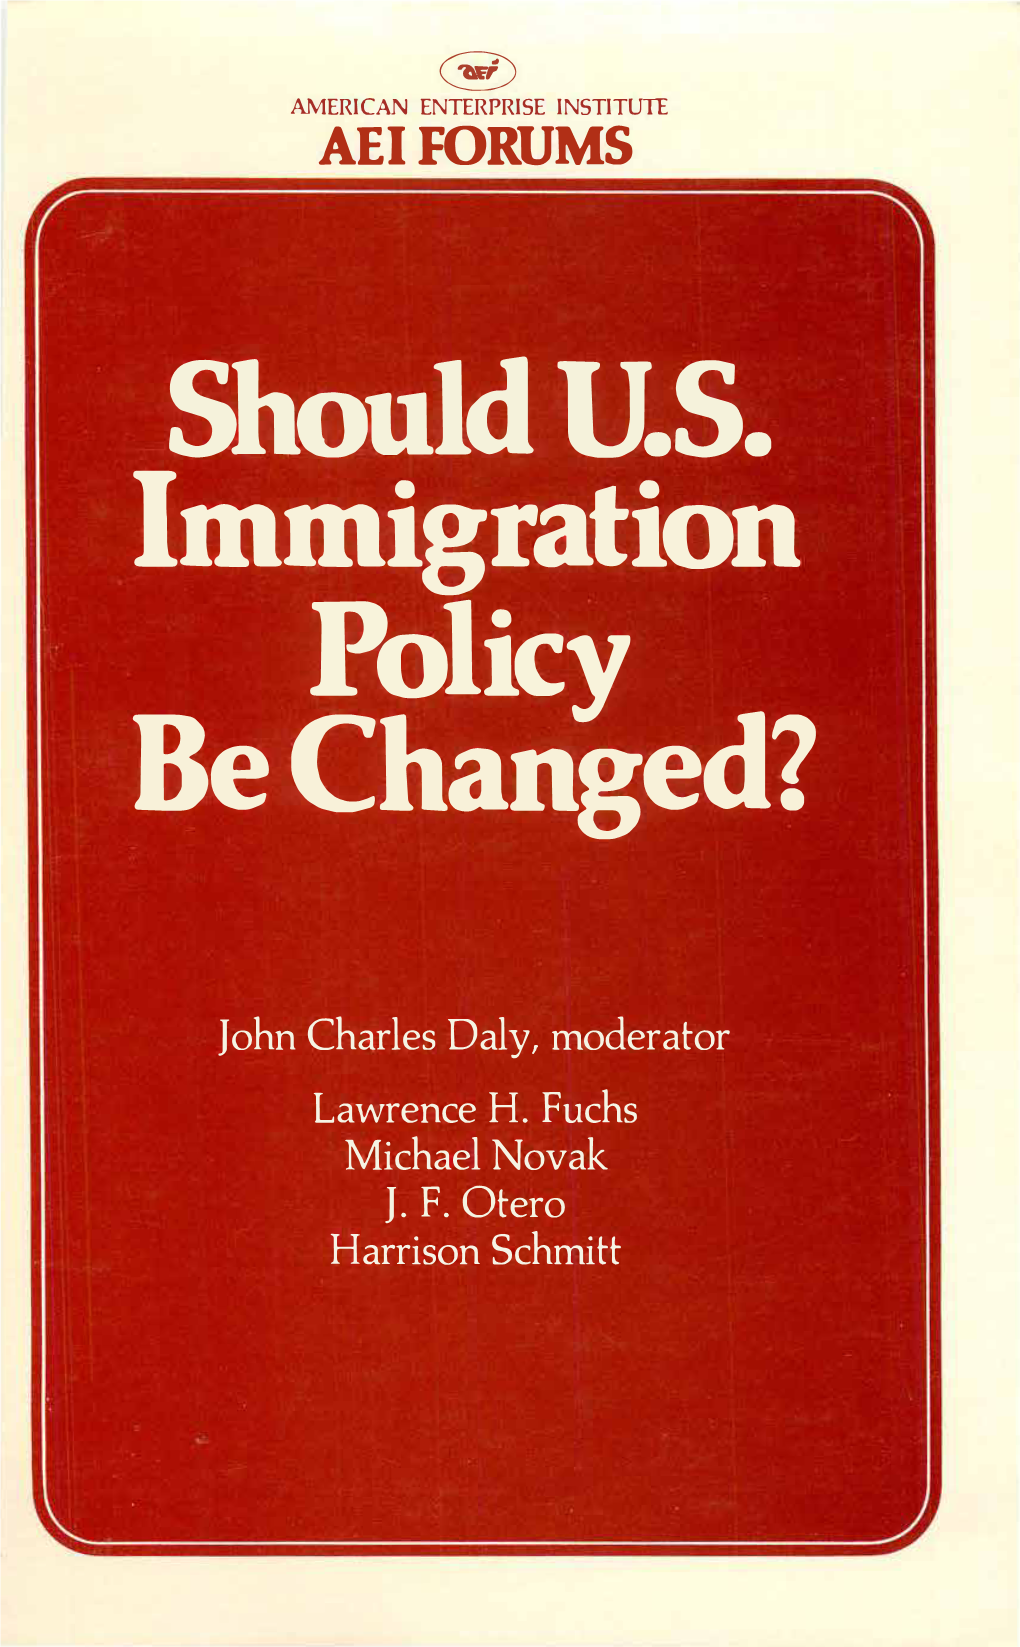 Should U.S. Immigration Policy Be Changed?